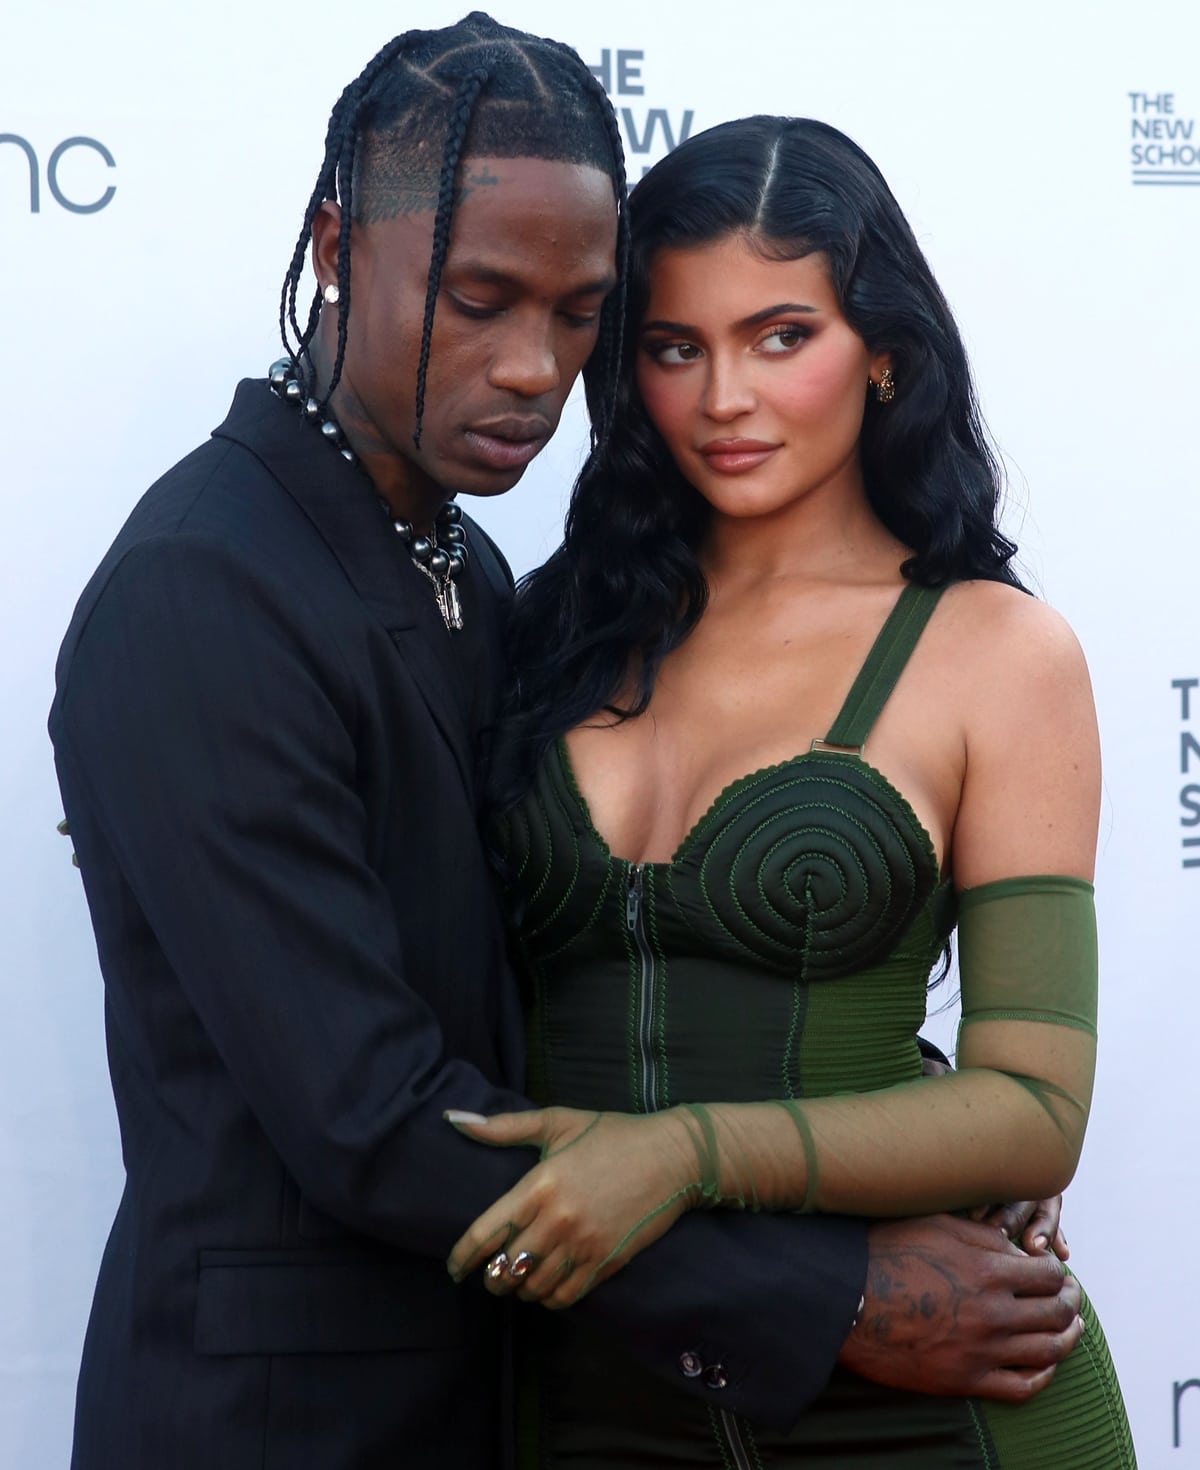 Kylie Jenner and Travis Scott seem to have rekindled their romance